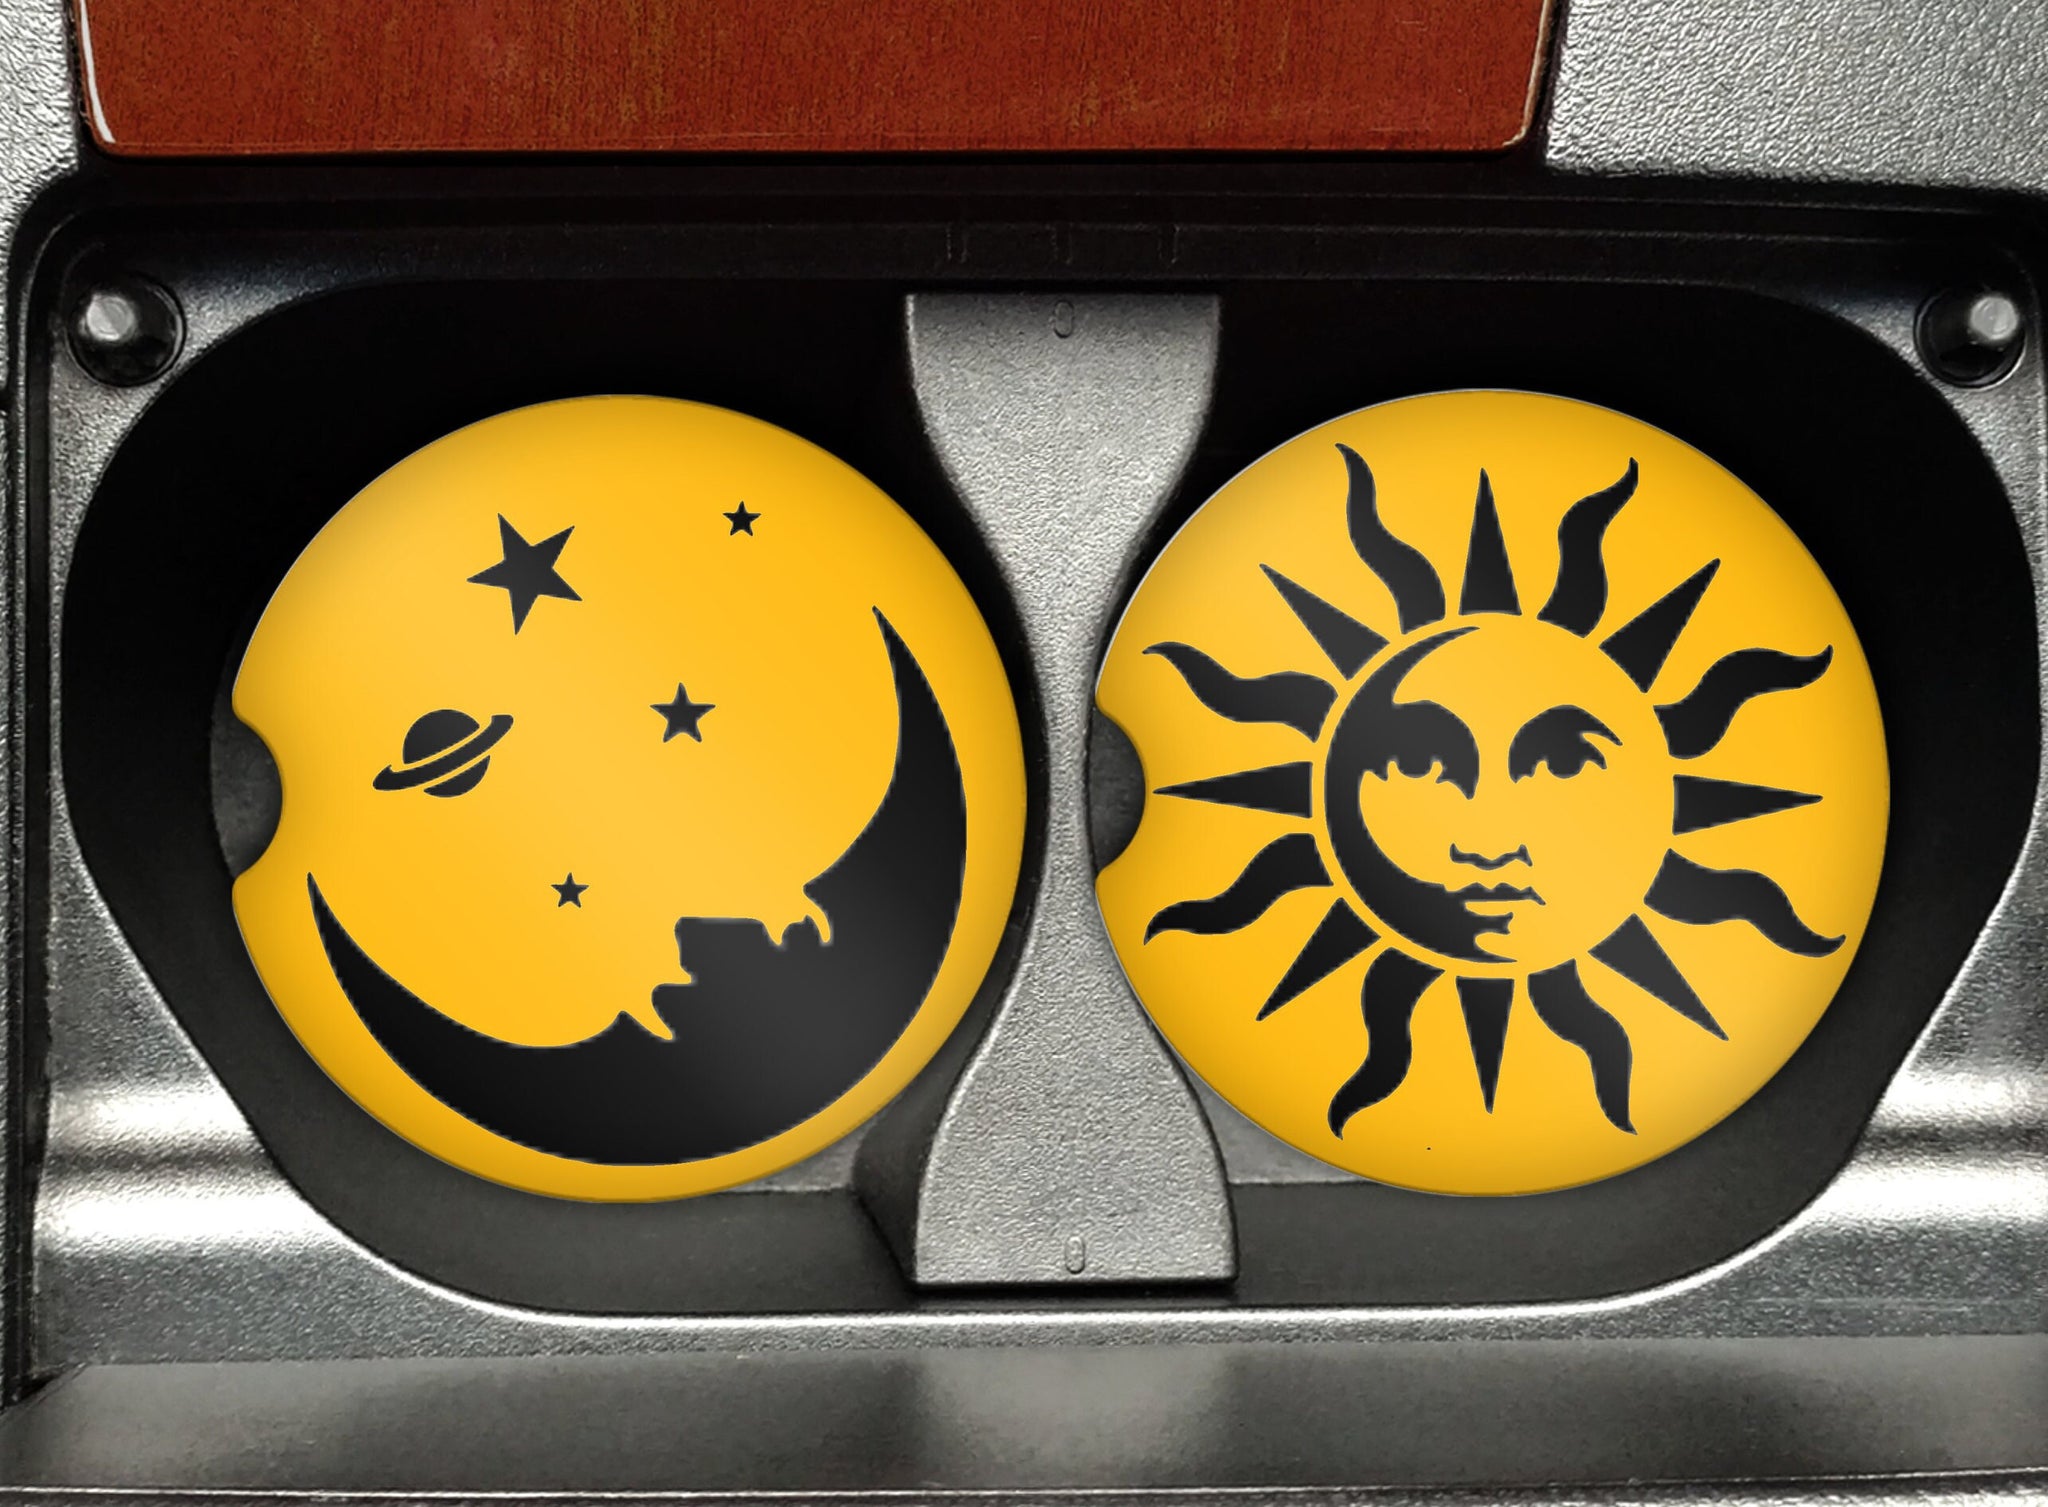 Sun and Moon Car Coasters For Cup Holder, Car Accessories, Celestial Coasters, Moon and Stars Drink Coasters, Sandstone Car Coaster